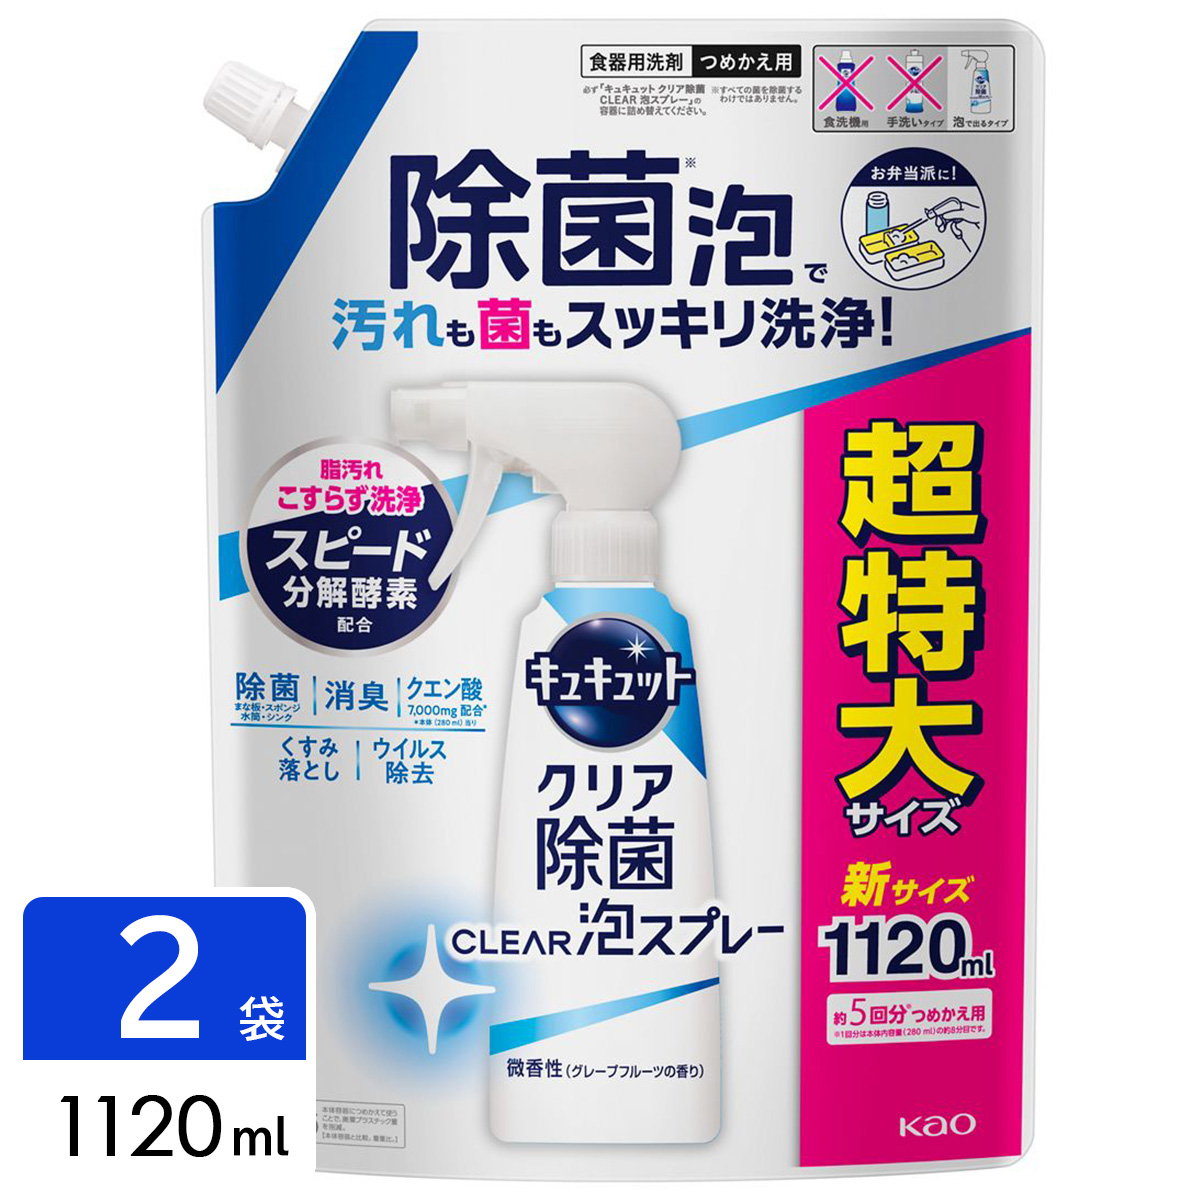 Kao キュキュット クリア除菌 CLEAR泡スプレー 微香性 詰替用 1120ml ×2 キュキュット 台所用洗剤の商品画像